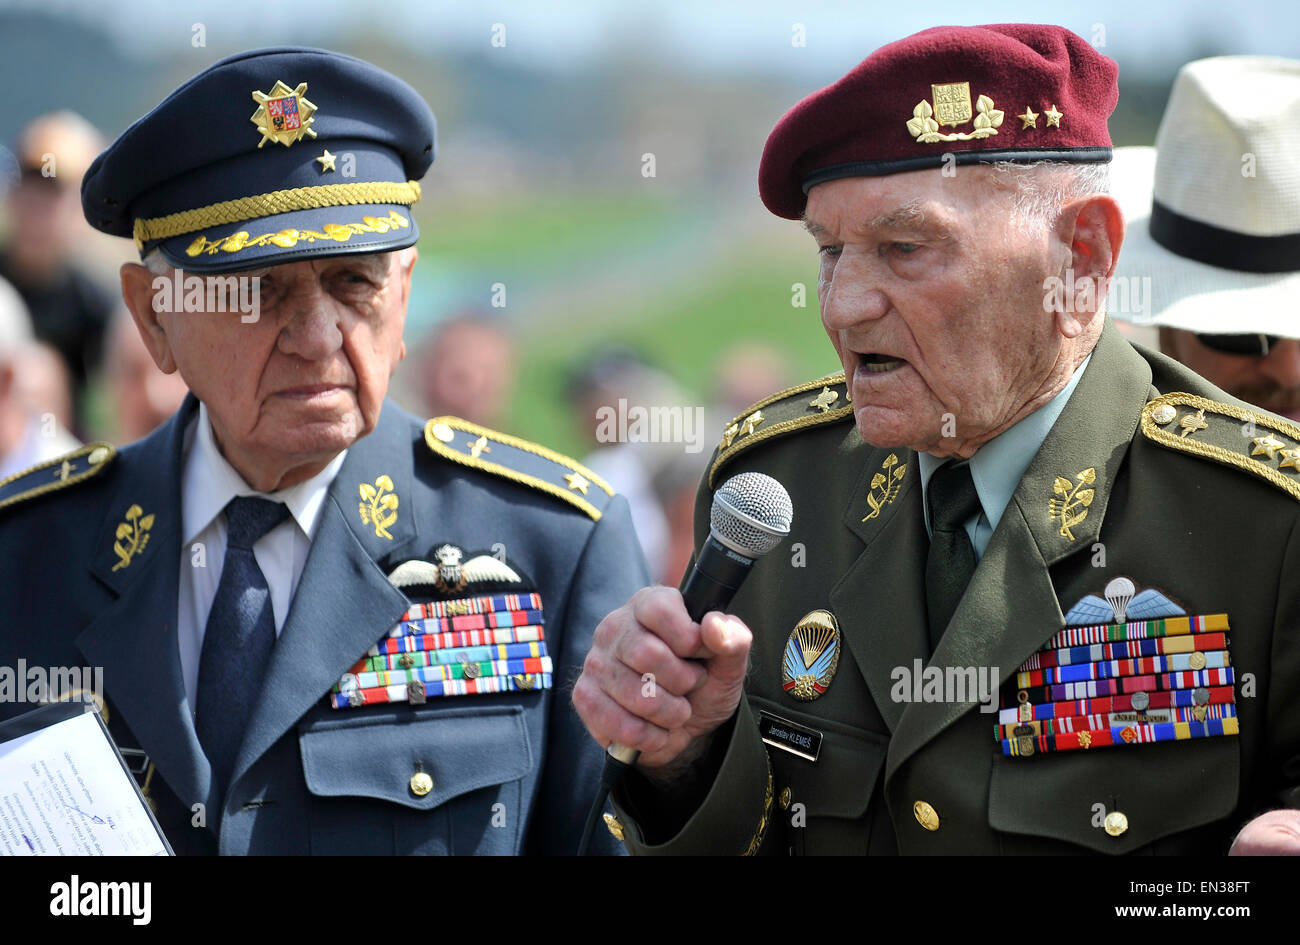 Orechov, Czech Republic. 25th Apr, 2015. About thousand people meet to commemorate wartime pilot Adolf Opalka on the occasion of his 100th birth anniversary and 73th anniversary of his parachute group Out Distance's operation participating in attack on Deputy Reichsprotektor Reinhard Heydrich and at the same time 70th anniversary of end of World War II, at the memorial in Orechov, Czech Republic, April 25, 2015. In the picture is Emil Bocek (left) one of the last living pilots of British Royal Air Force (RAF) and speaking Jaroslav Klemes, the last living parachutist landed in protectorate. (CT Stock Photo